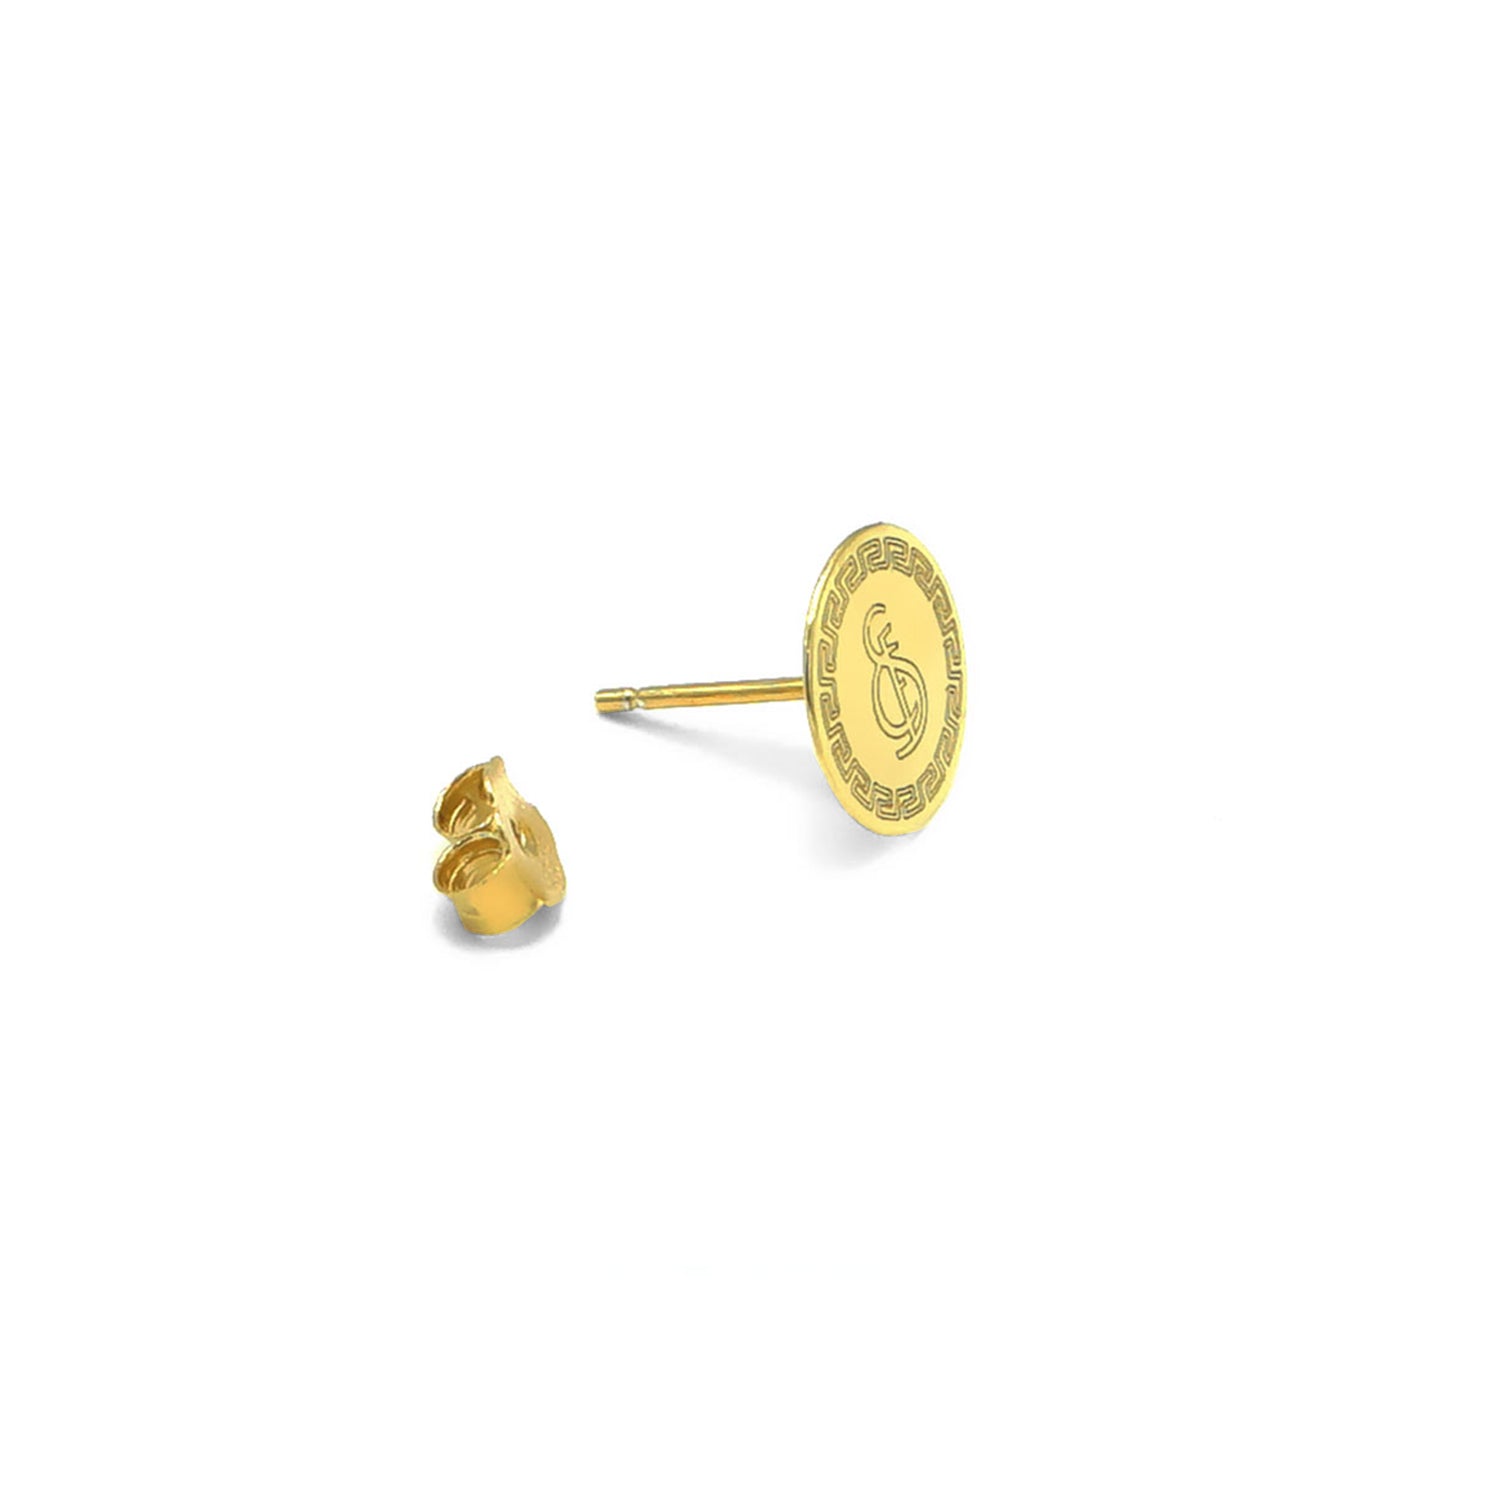 SFC gold plated silver earrings